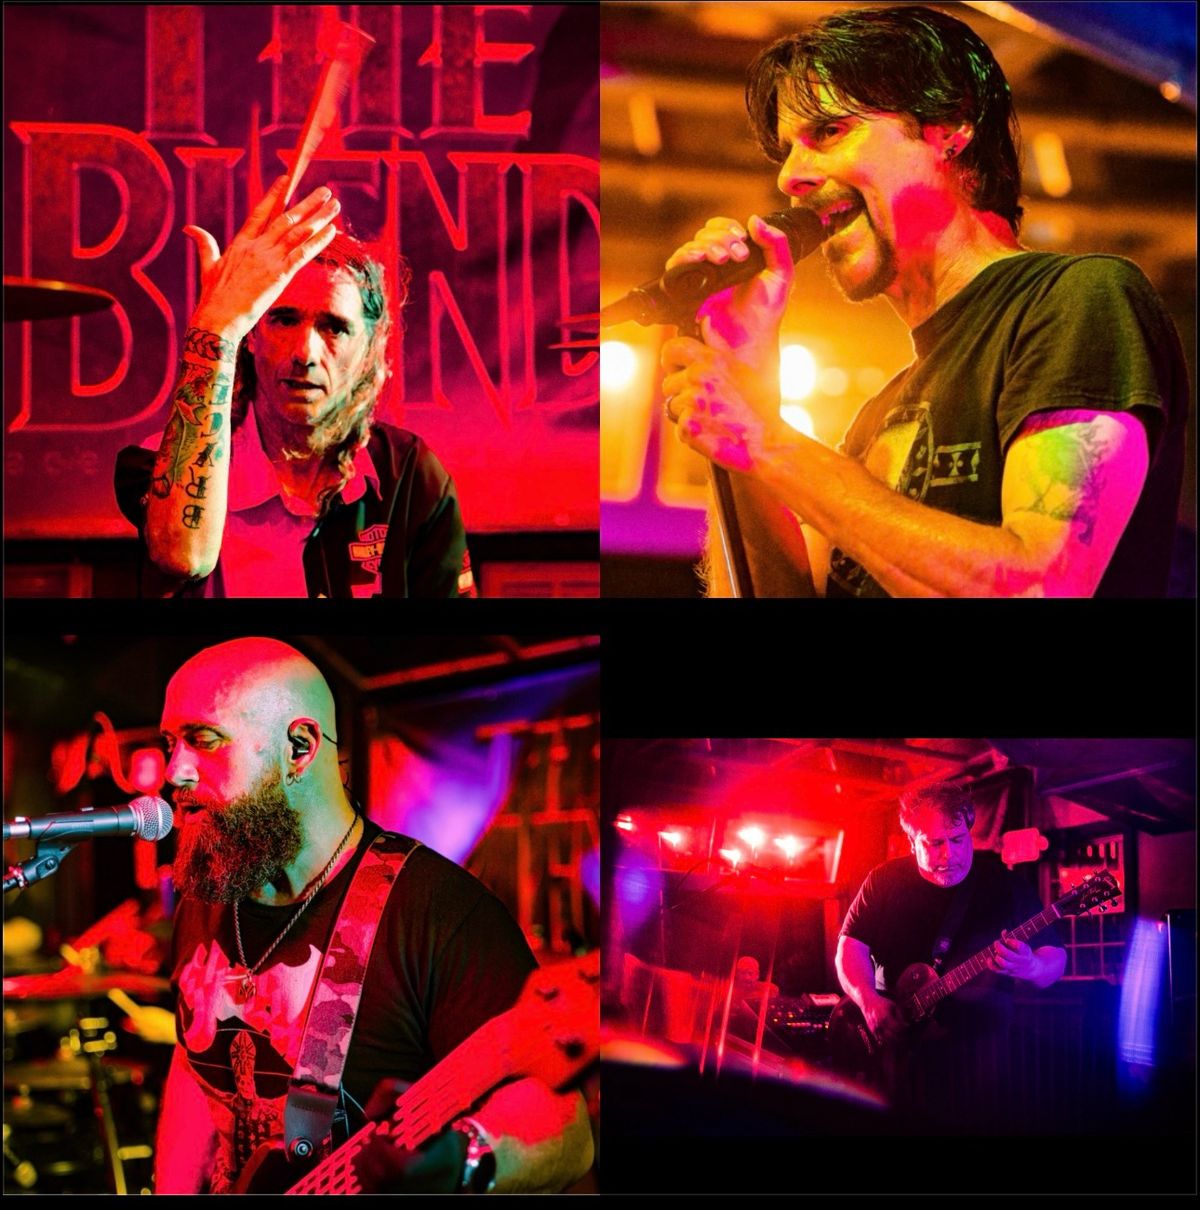 The Blend Live At The Juke Joint Saturday September 7th @ 11:00pm